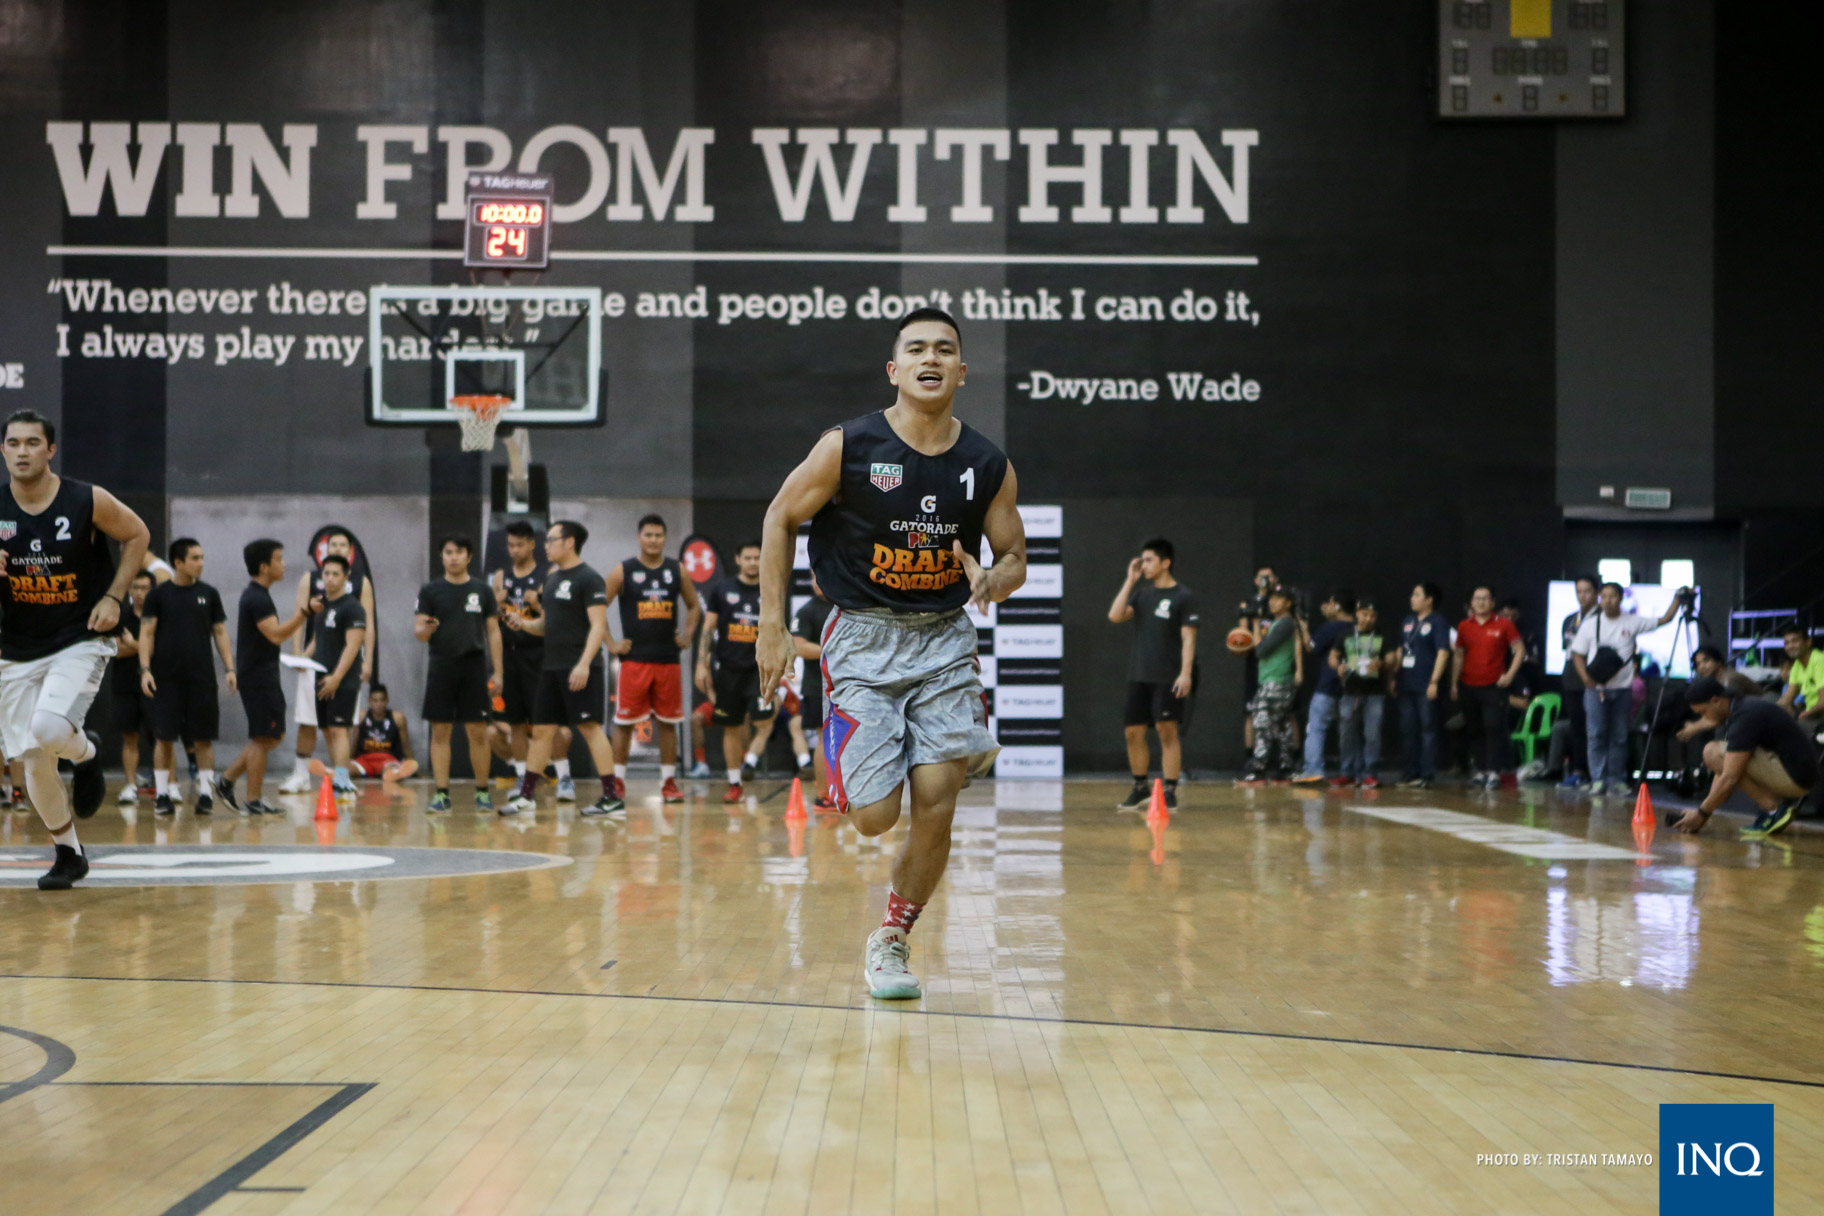 Jio Jalalon goes through a drill at the 2016 PBA Rookie Draft Combine. Photo by Tristan Tamayo/INQUIRER.net